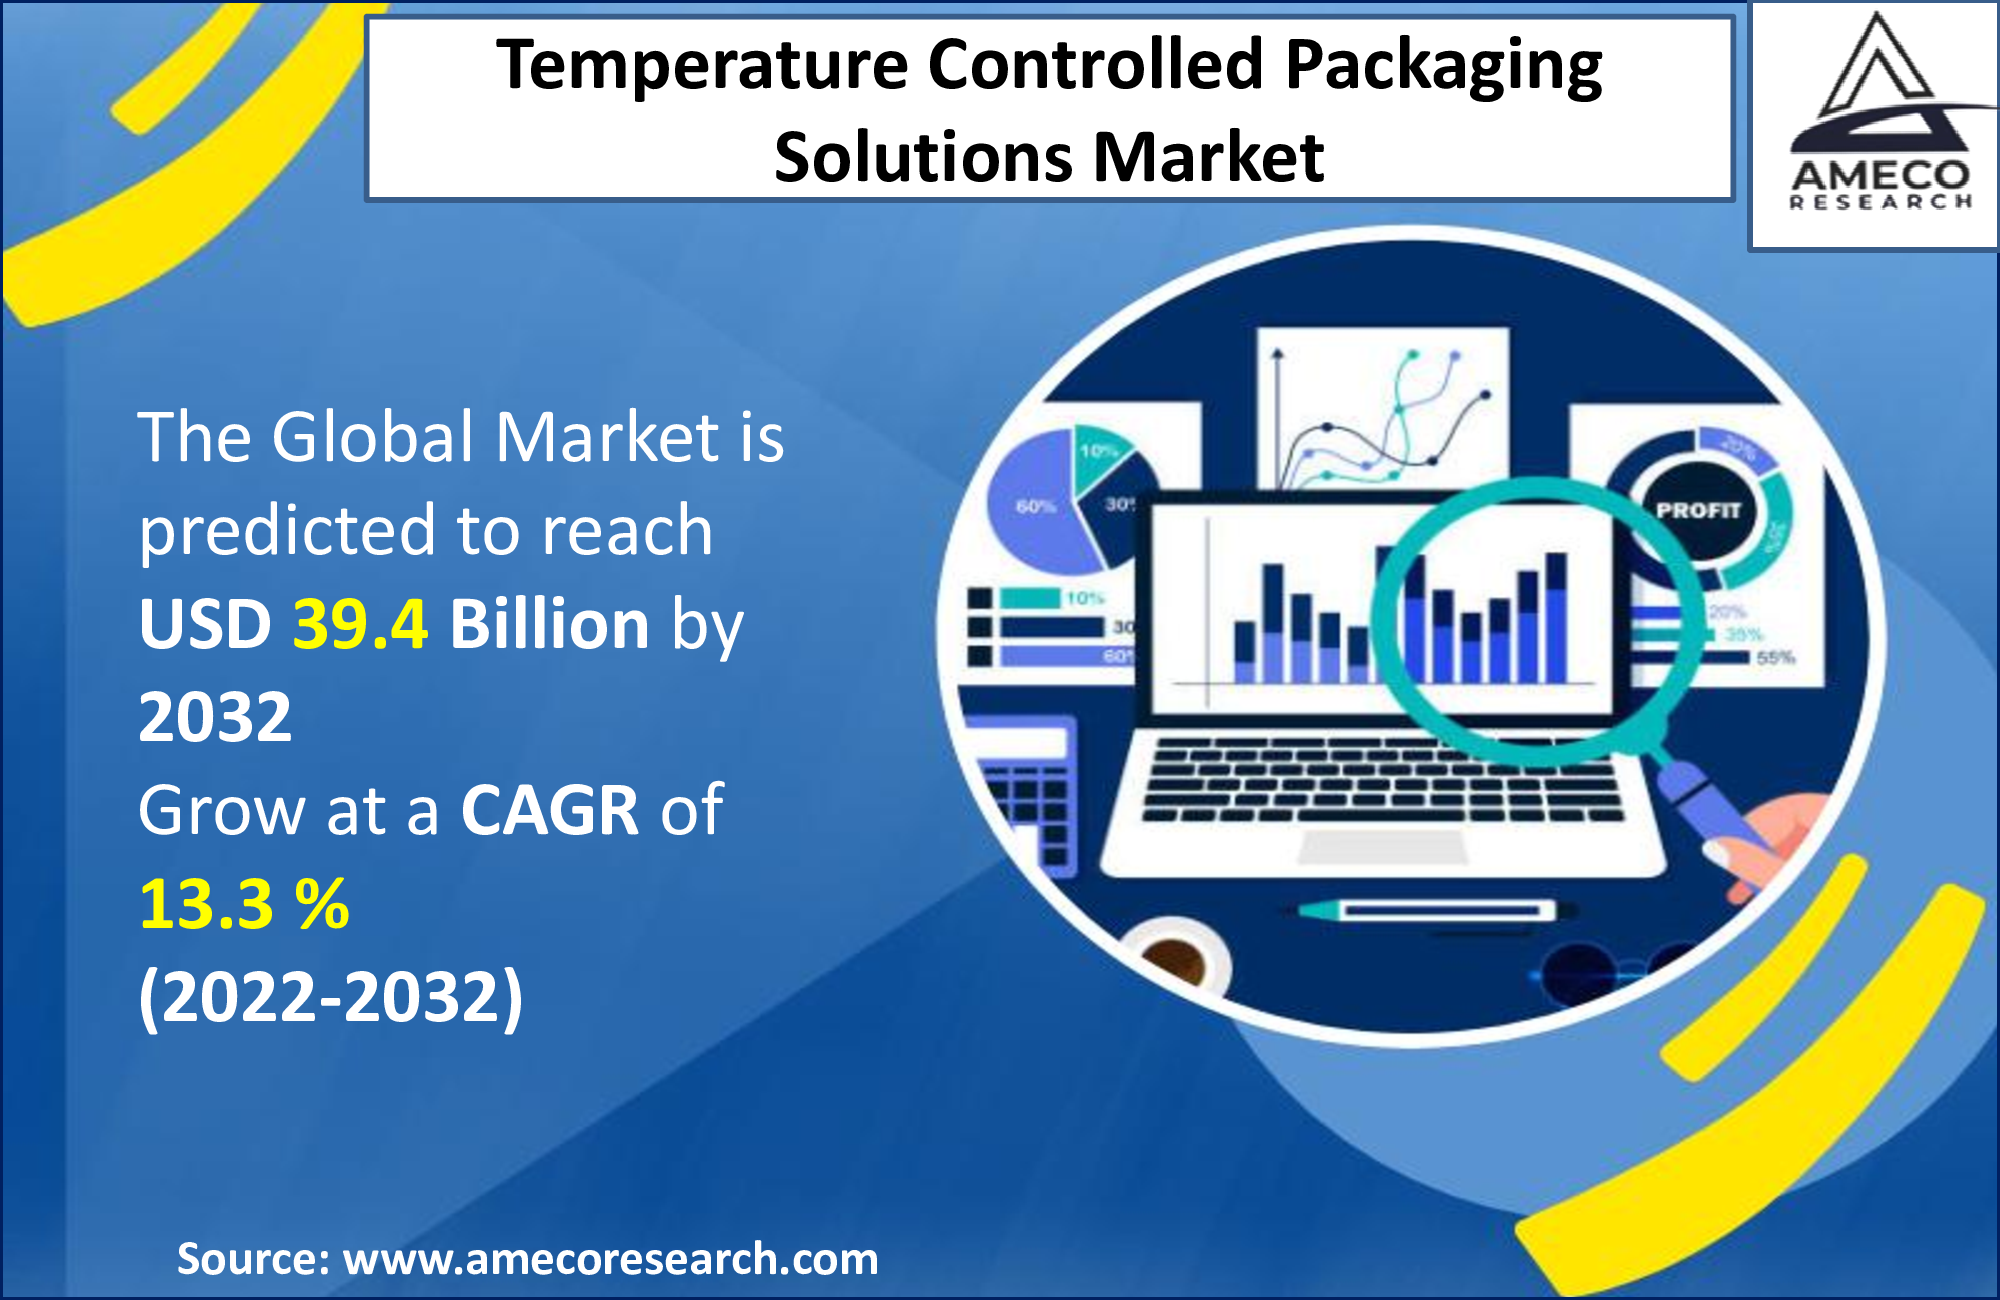 Temperature-Controlled Packaging Solutions Market